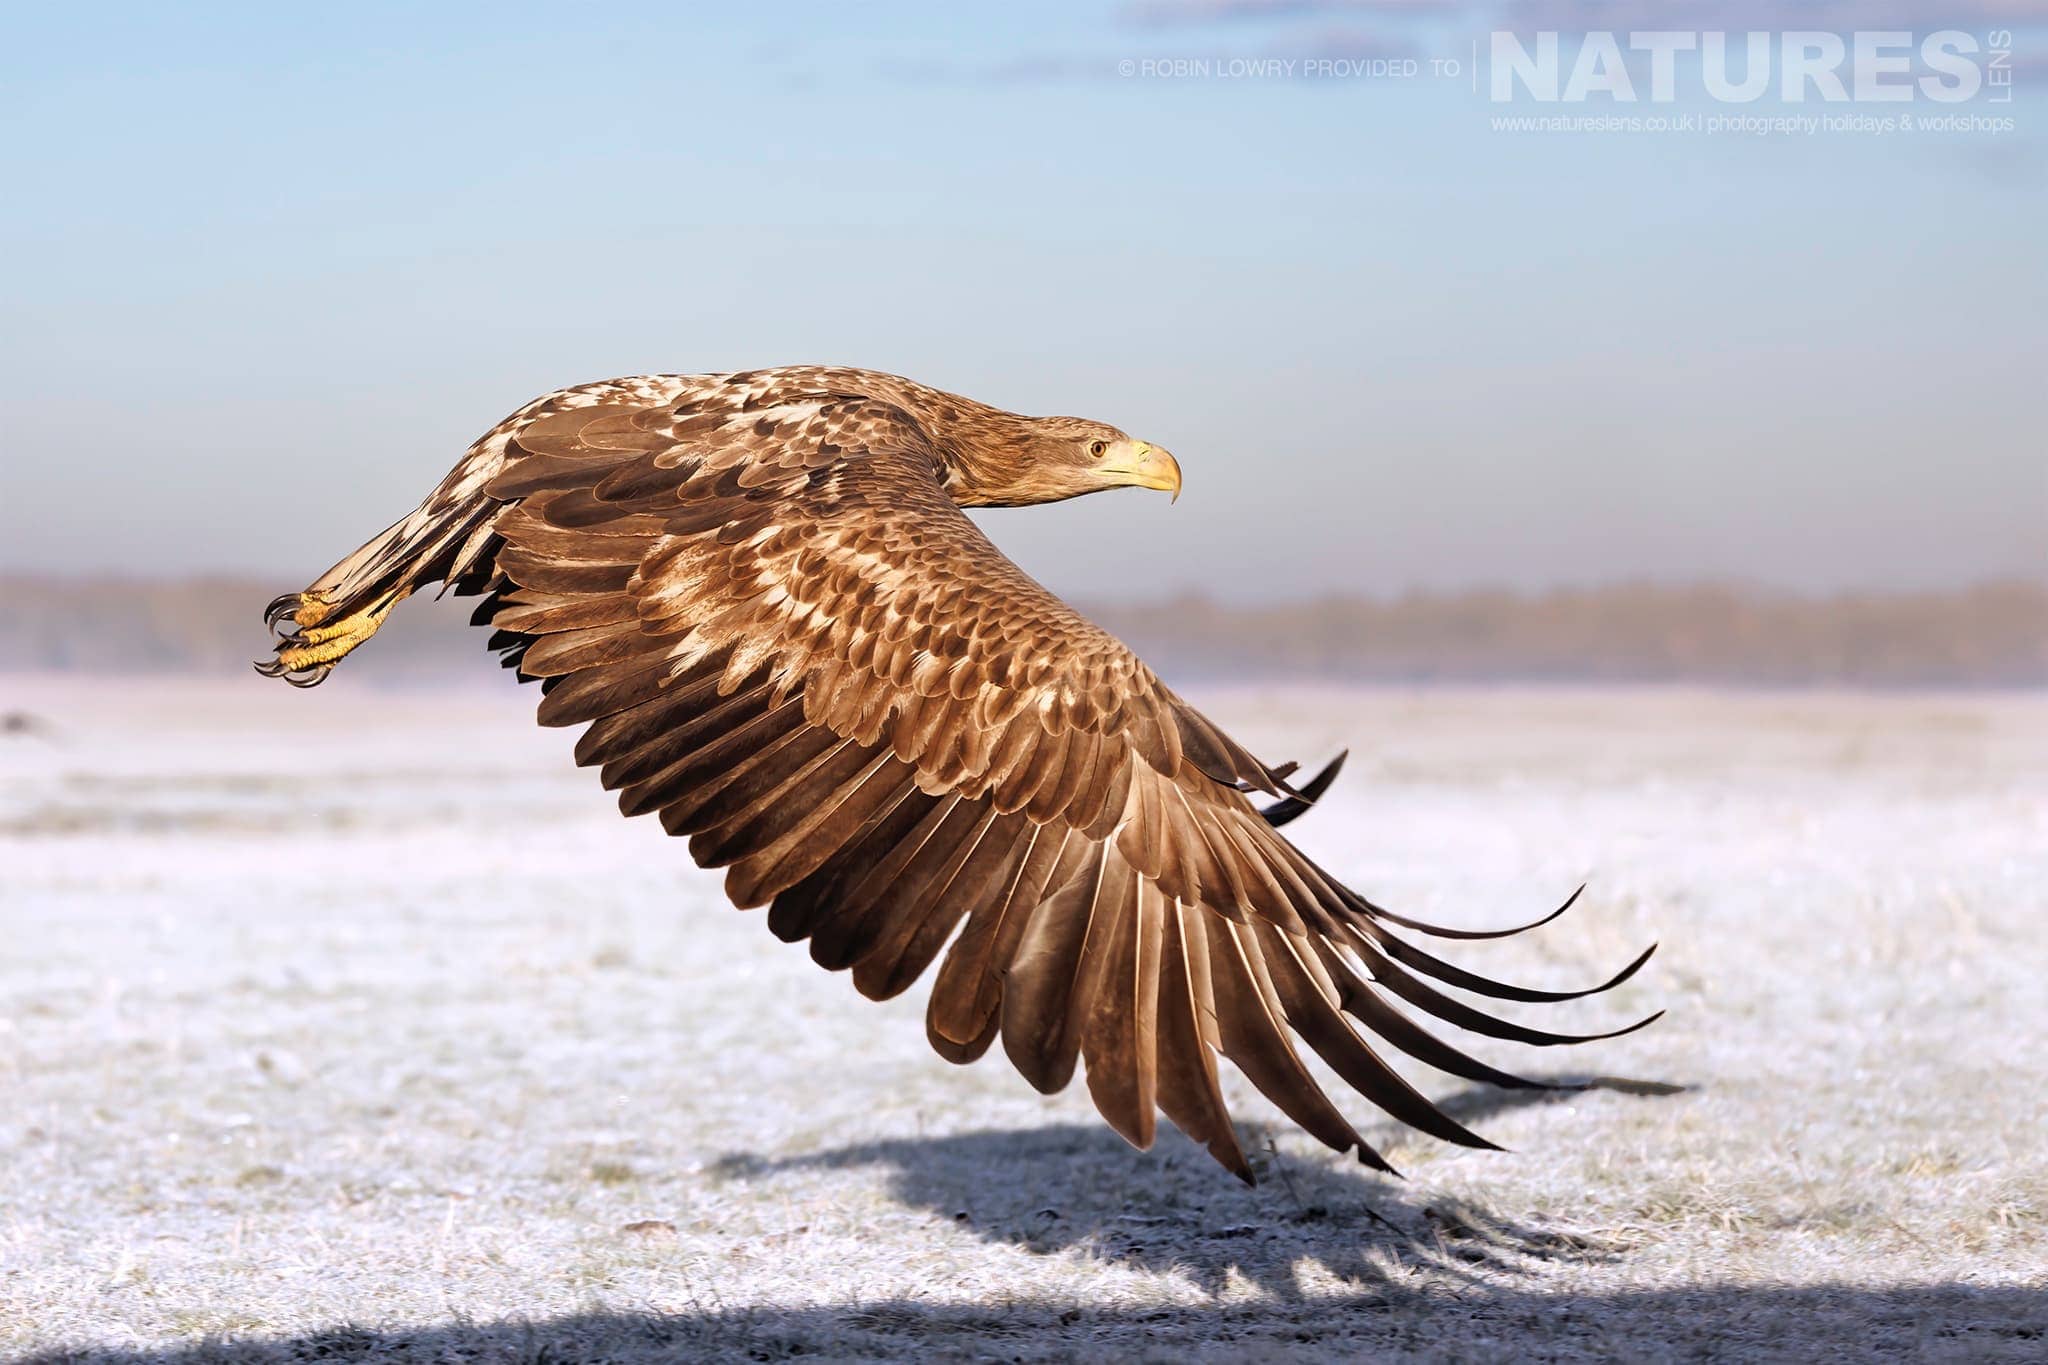 One Of The White Tailed Eagles Flies Across The Frozen Ground The Largest Bird Species Found Amongst The Wildlife Of The Hortobágy National Park In Hungary